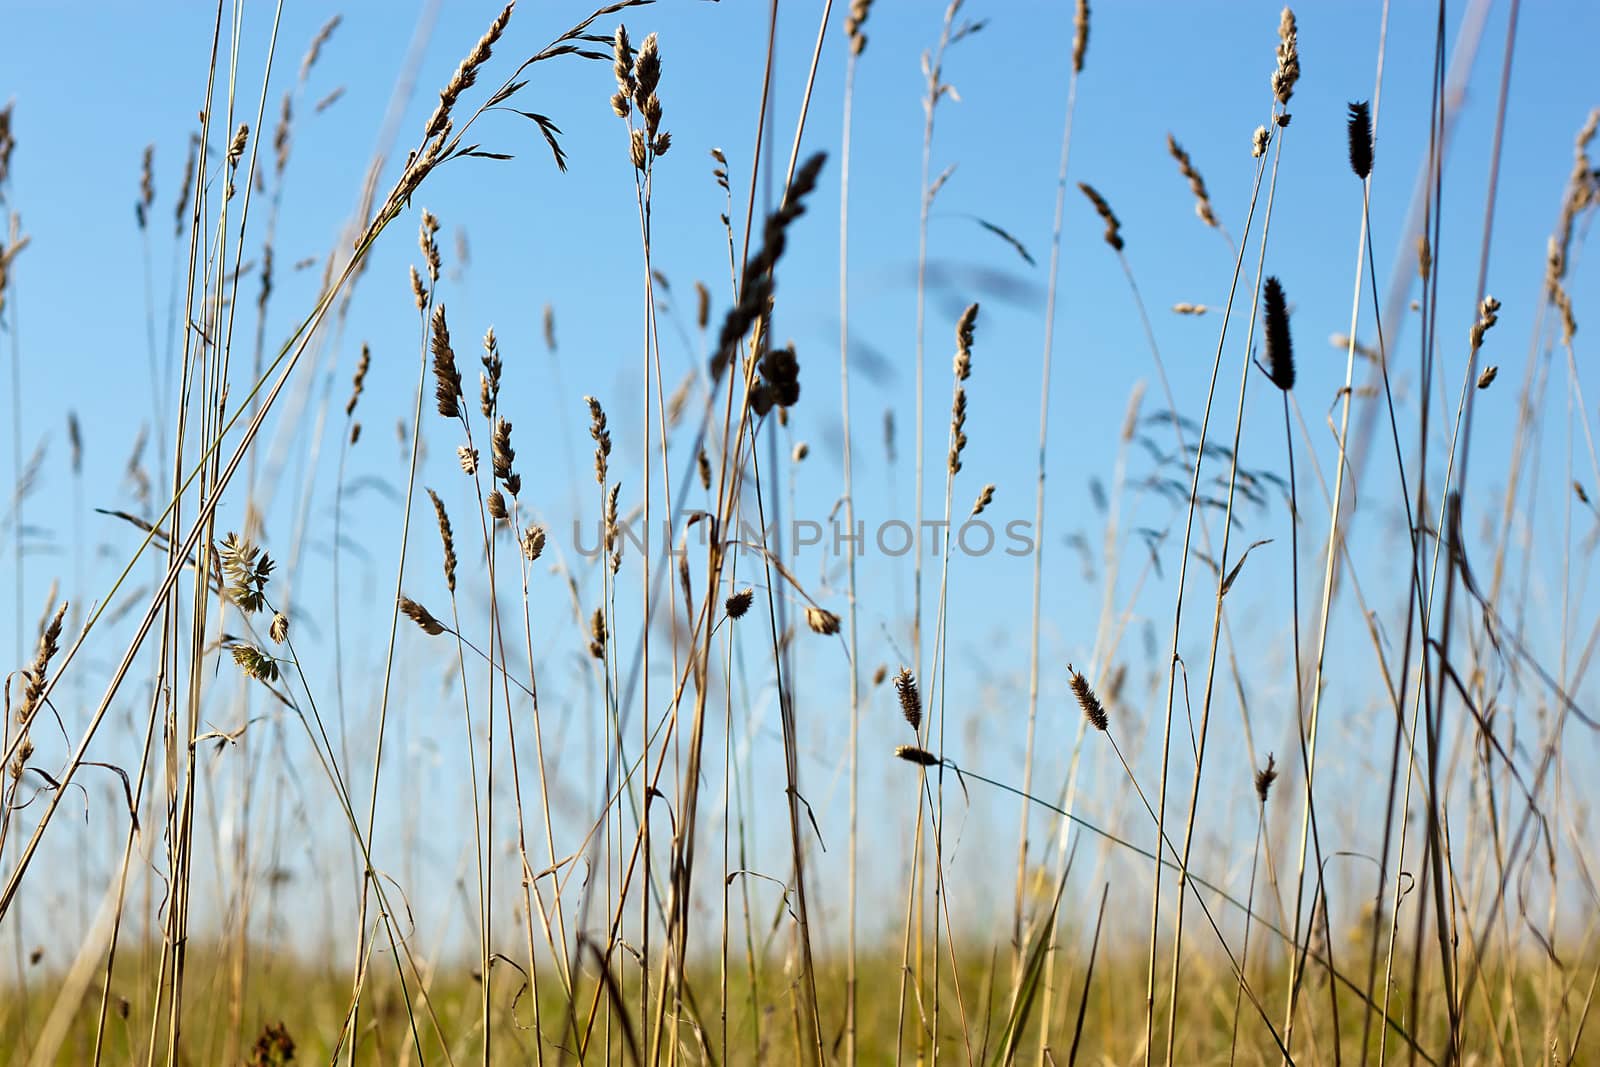 We see summer field with high grass and bright blue sky